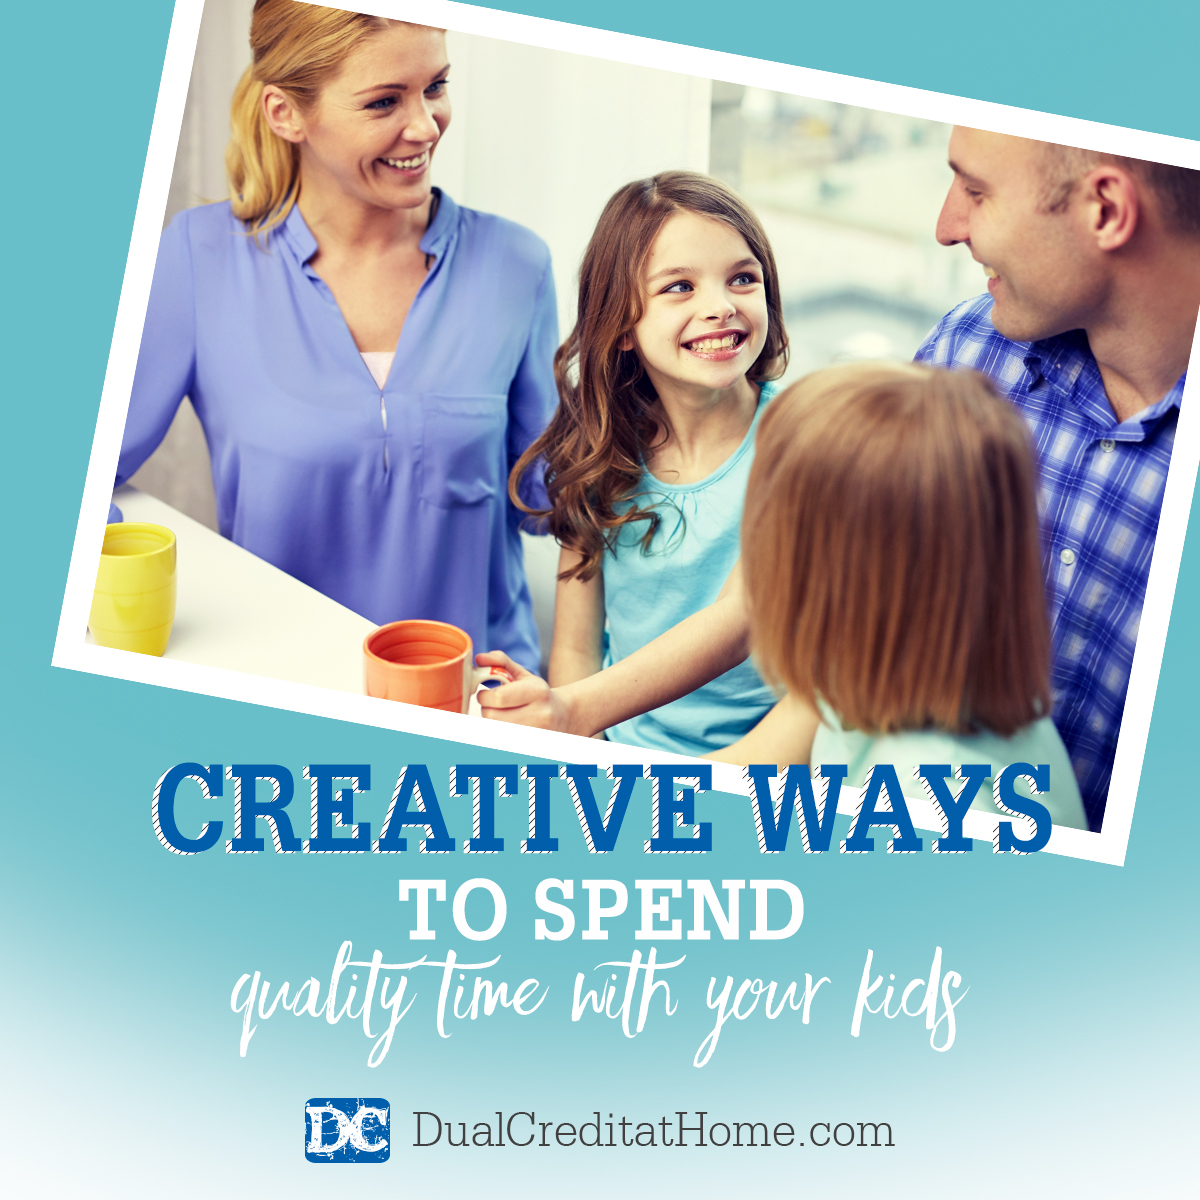 Creative Ways to Spend Quality Time with Your Kids